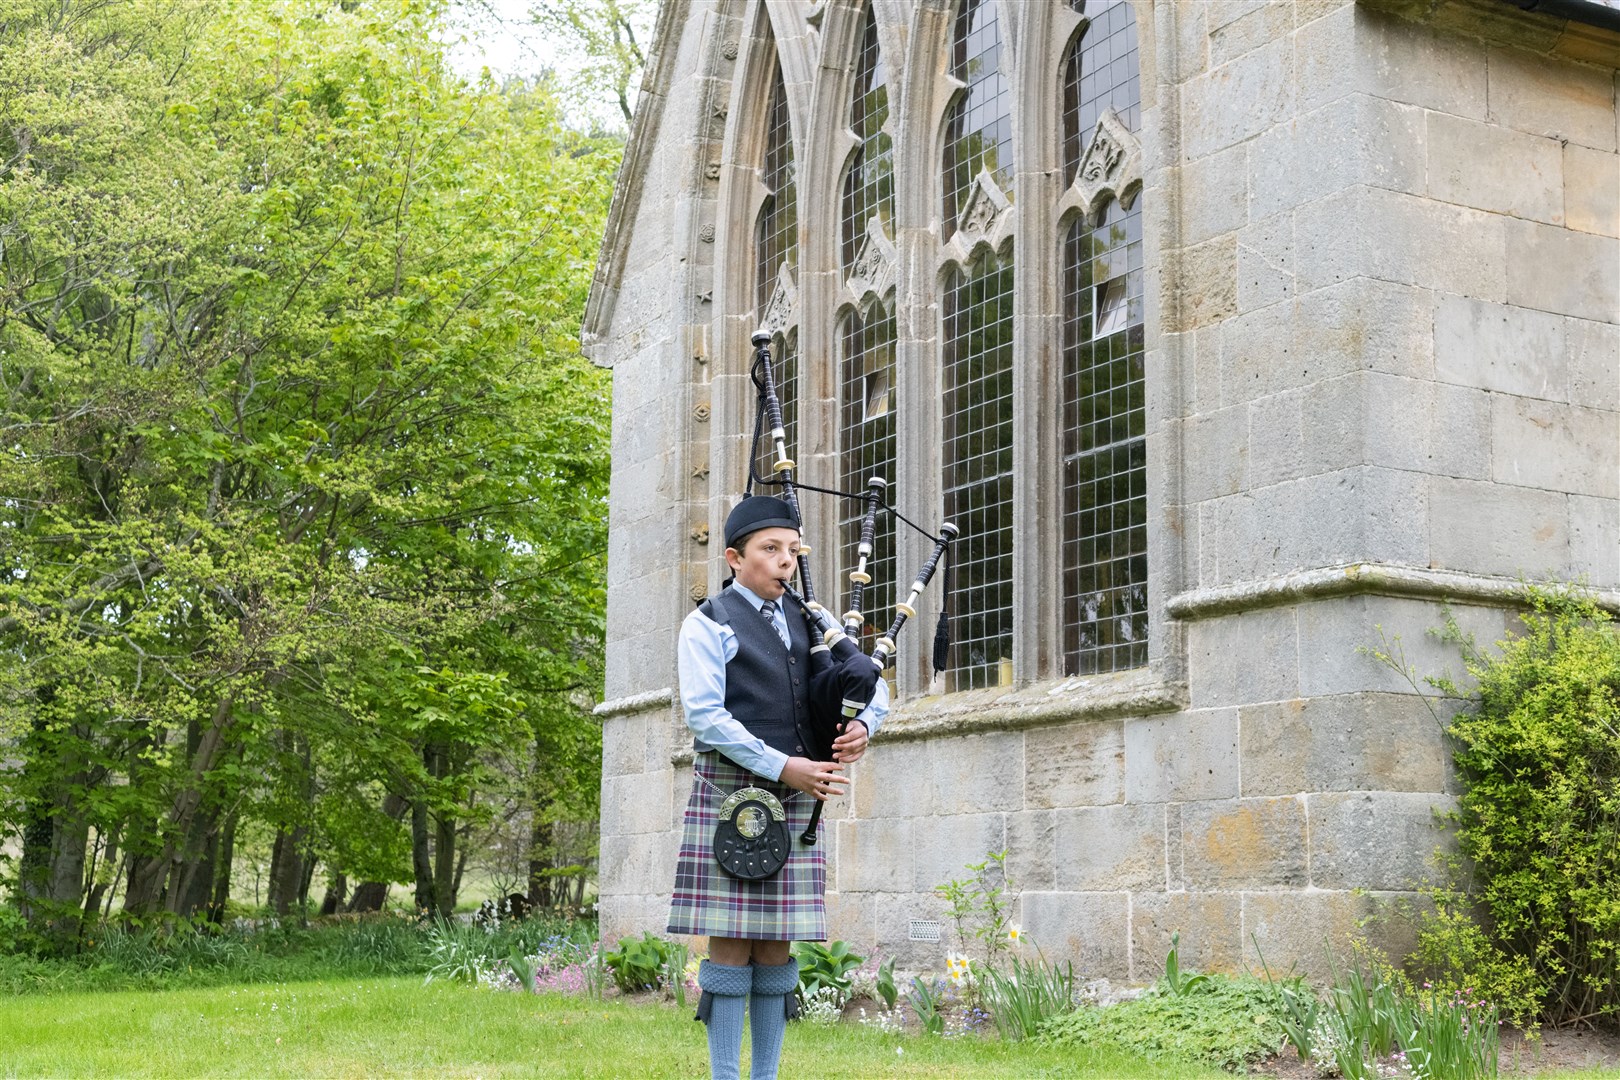 Pupil Oscar MB played the bagpipes for the occasion. Picture: Beth Taylor